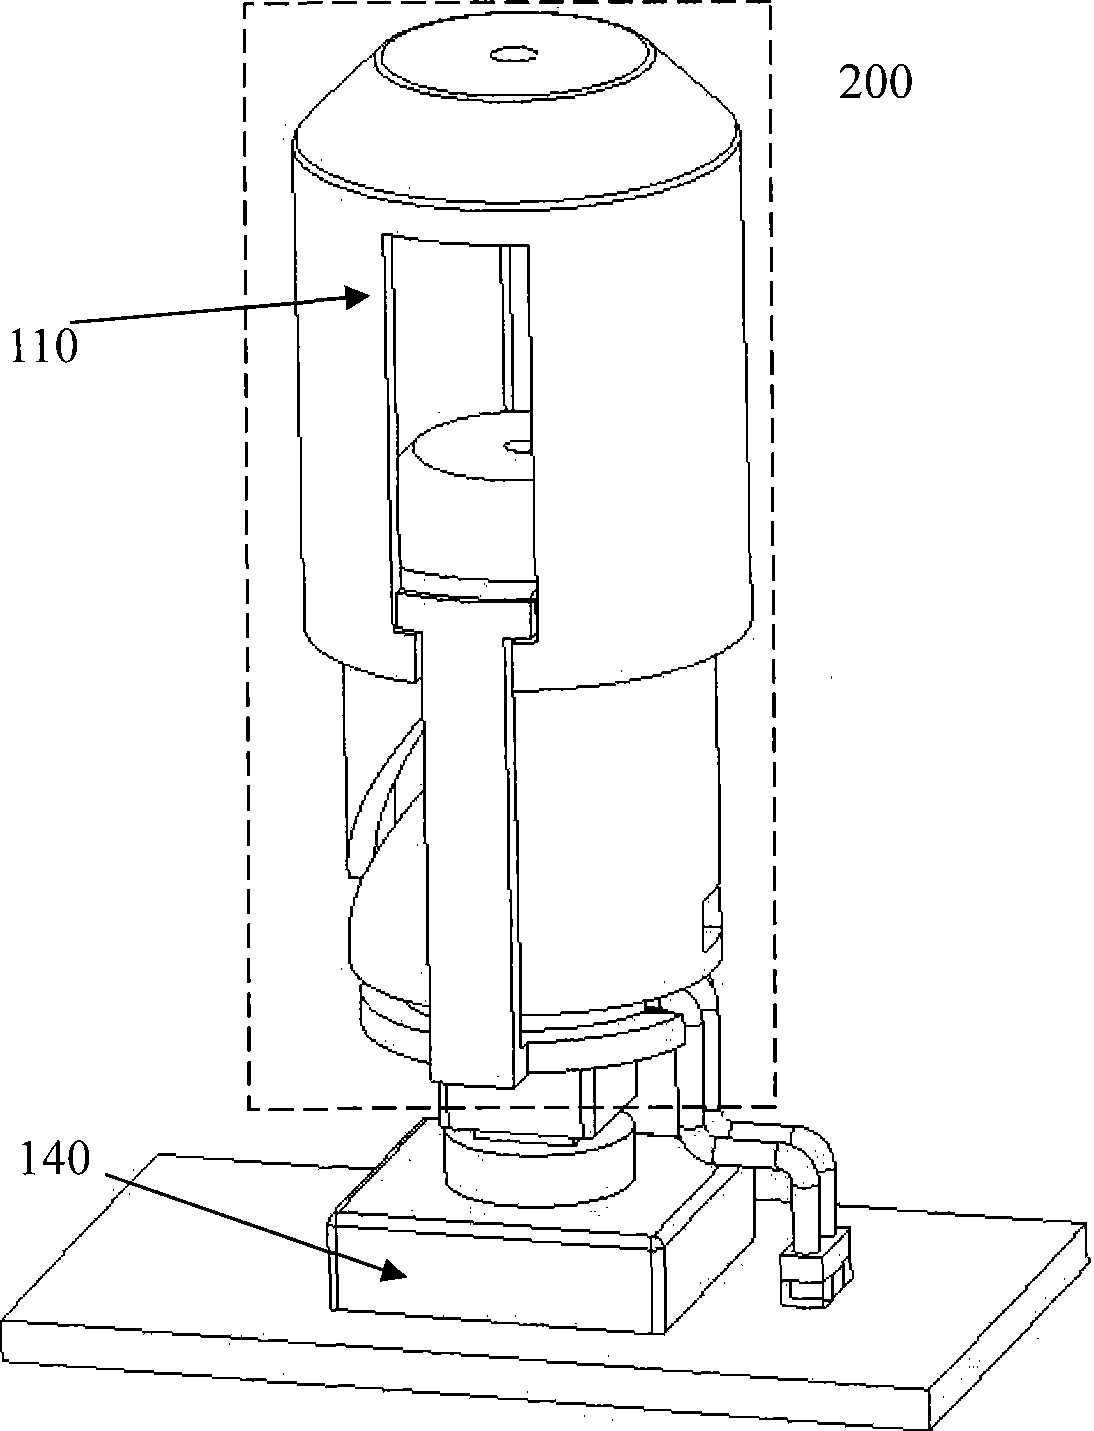 Telescopic switching operation control system